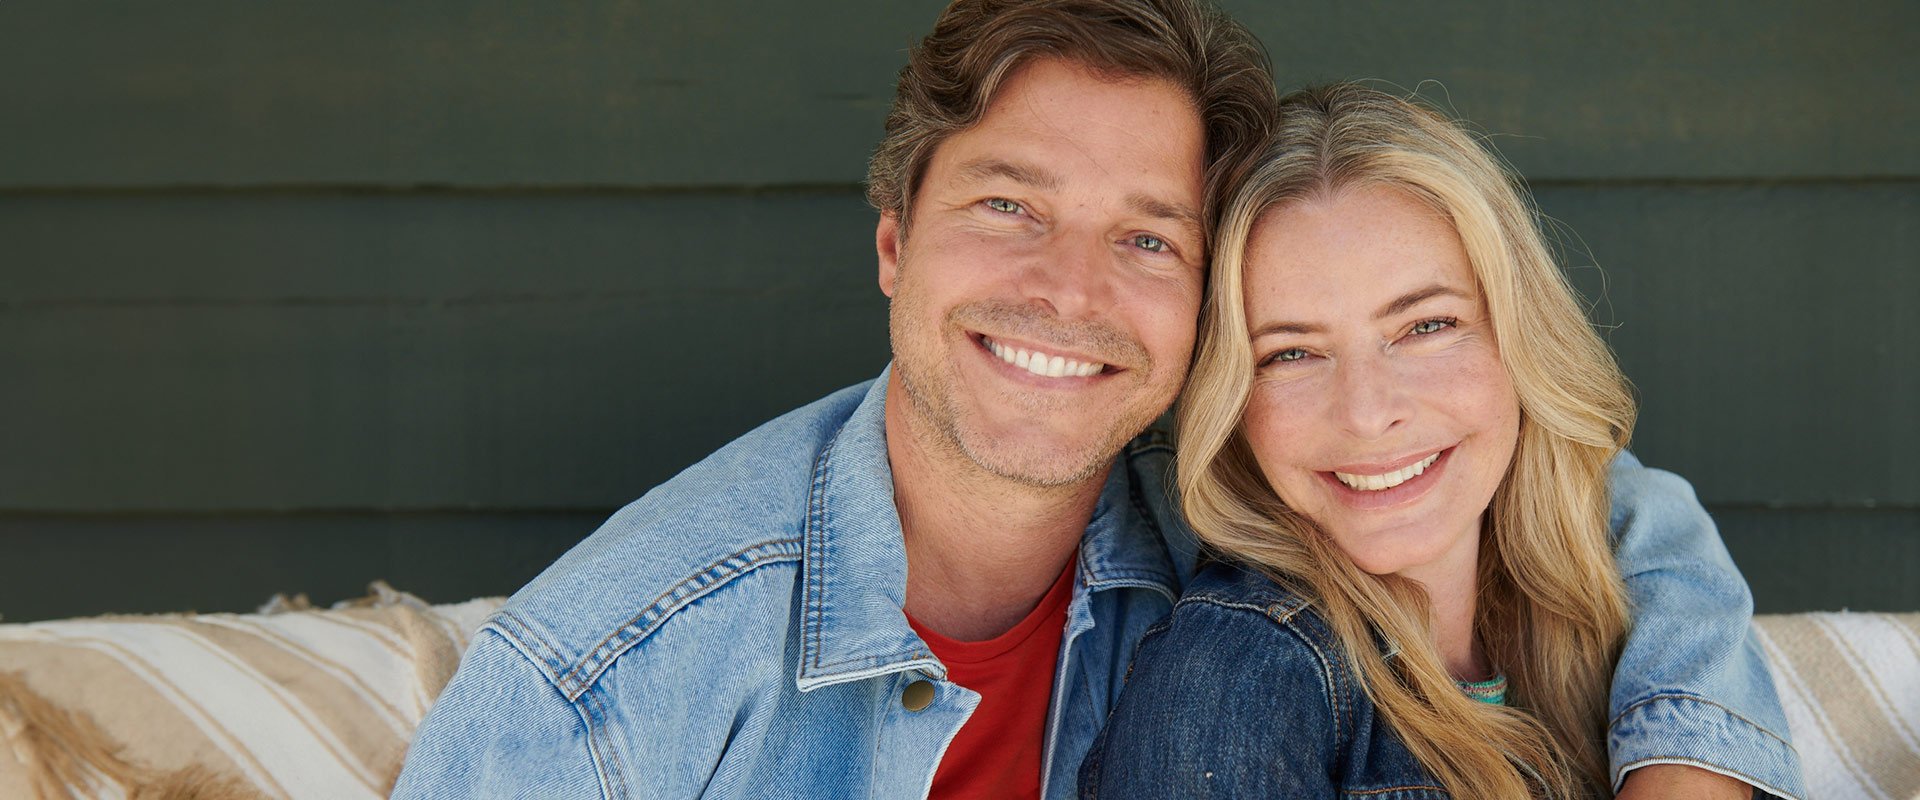 Man and woman over 50 smiling to camera as a couple